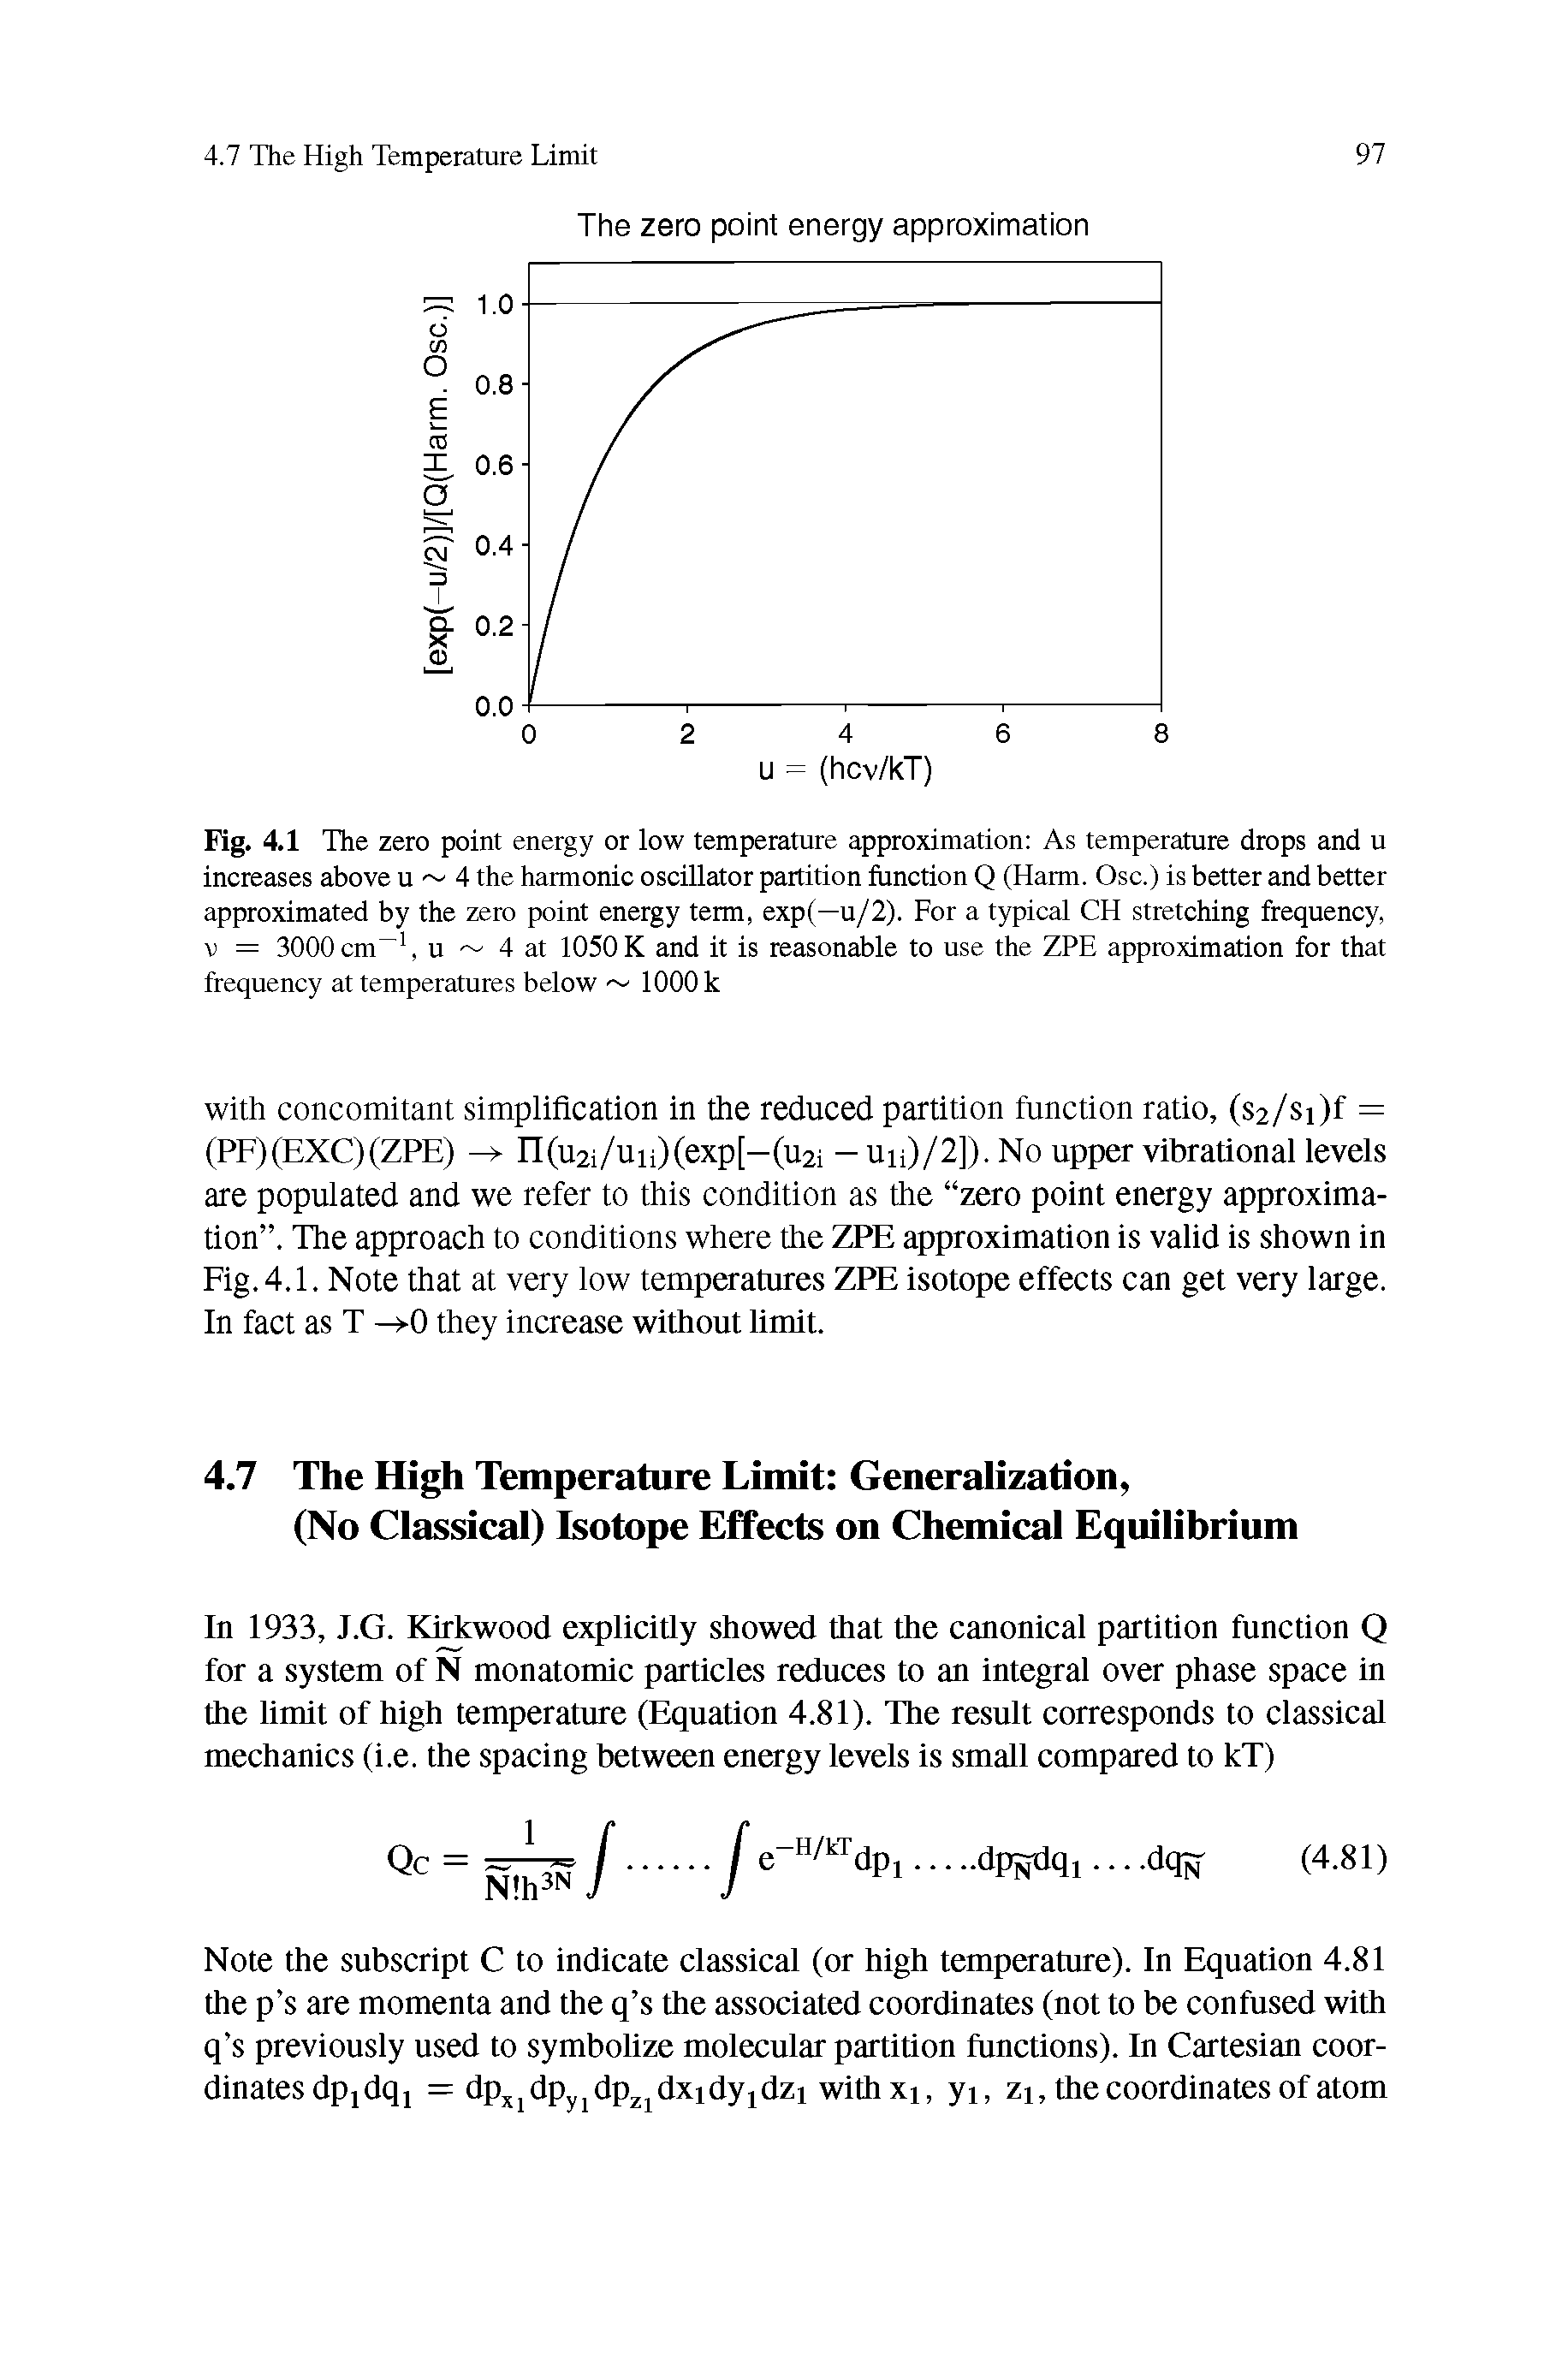 Fig. 4.1 The zero point energy or low temperature approximation As temperature drops and u increases above u 4 the harmonic oscillator partition function Q (Harm. Osc.) is better and better approximated by the zero point energy term, exp(—u/2). For a typical CH stretching frequency, v = 3000 cm-1, u 4 at 1050 K and it is reasonable to use the ZPE approximation for that frequency at temperatures below 1000 k...